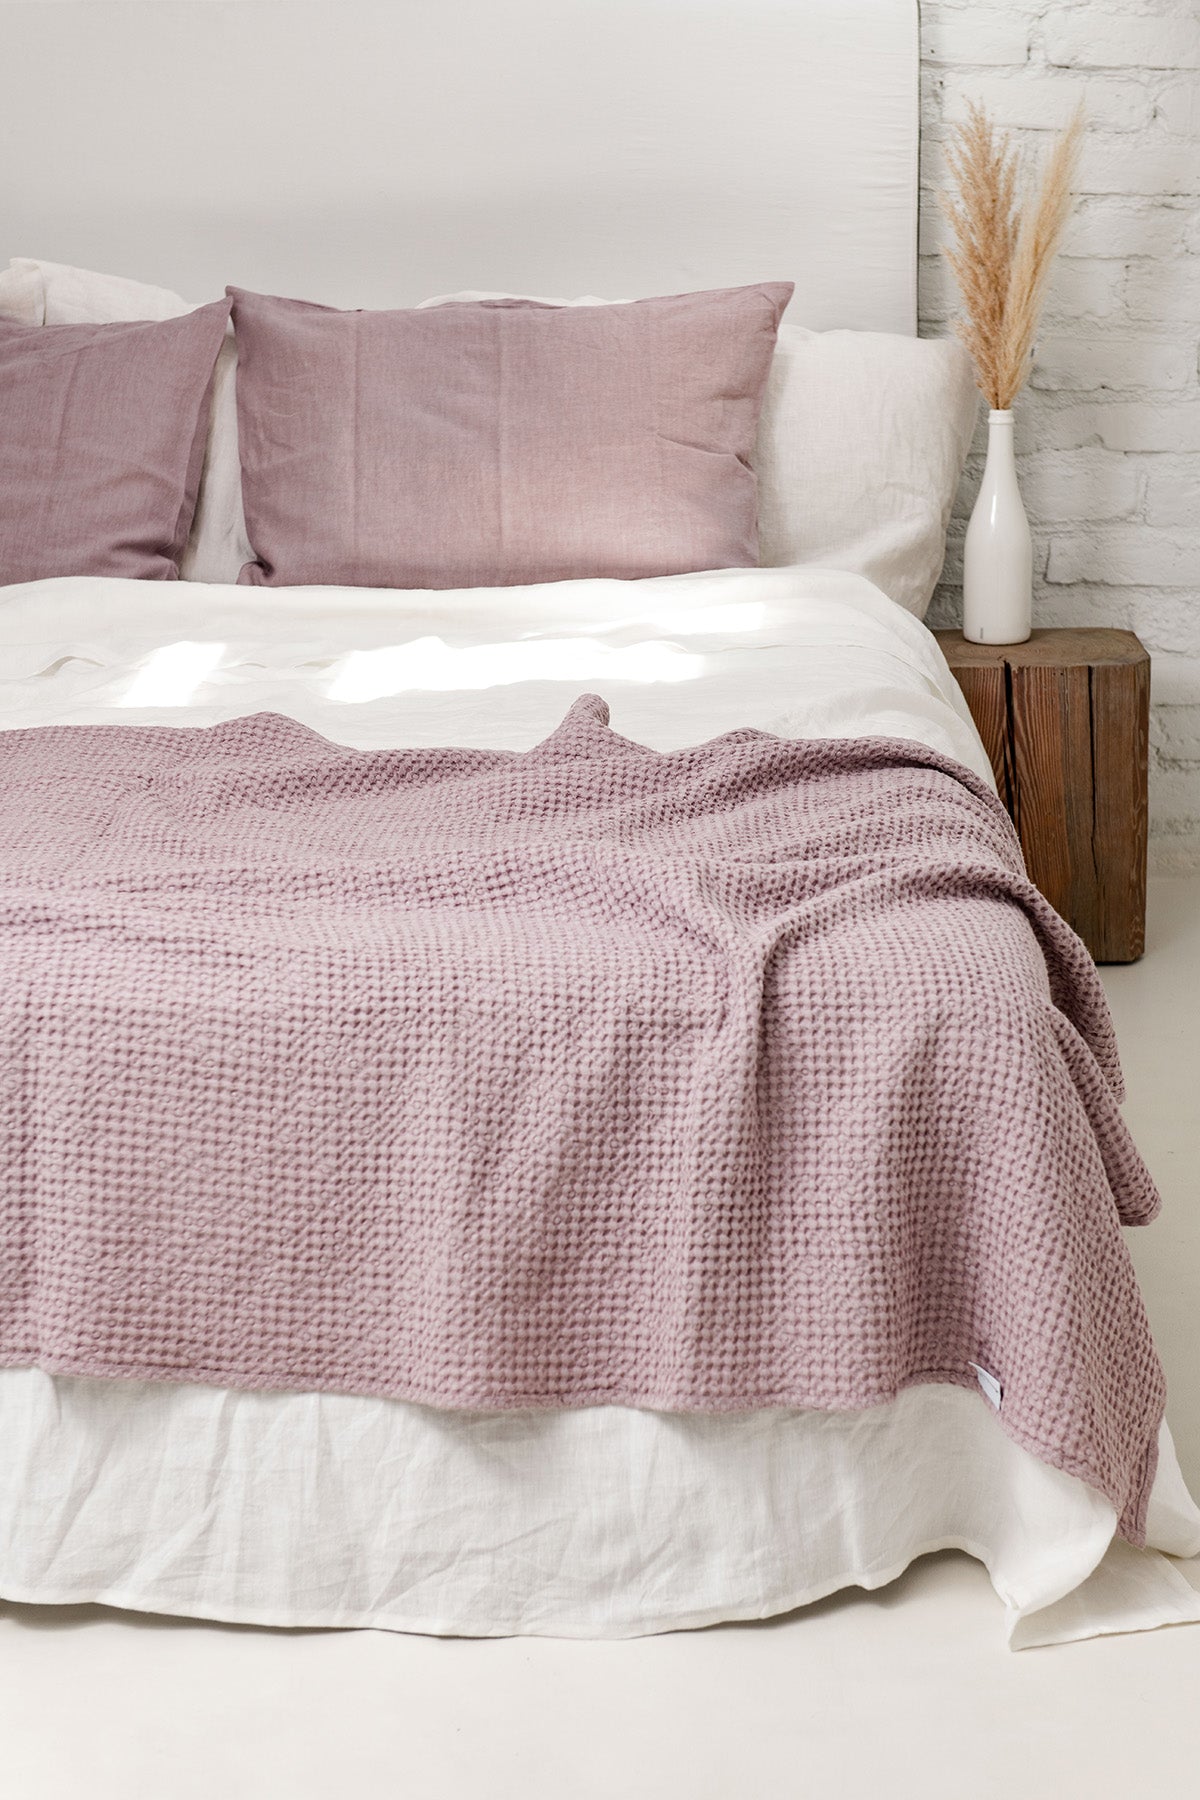 Corenr Close Up Of Bed WIth Dusty Rose Linen Waffle Bed Throw By AmourlInen